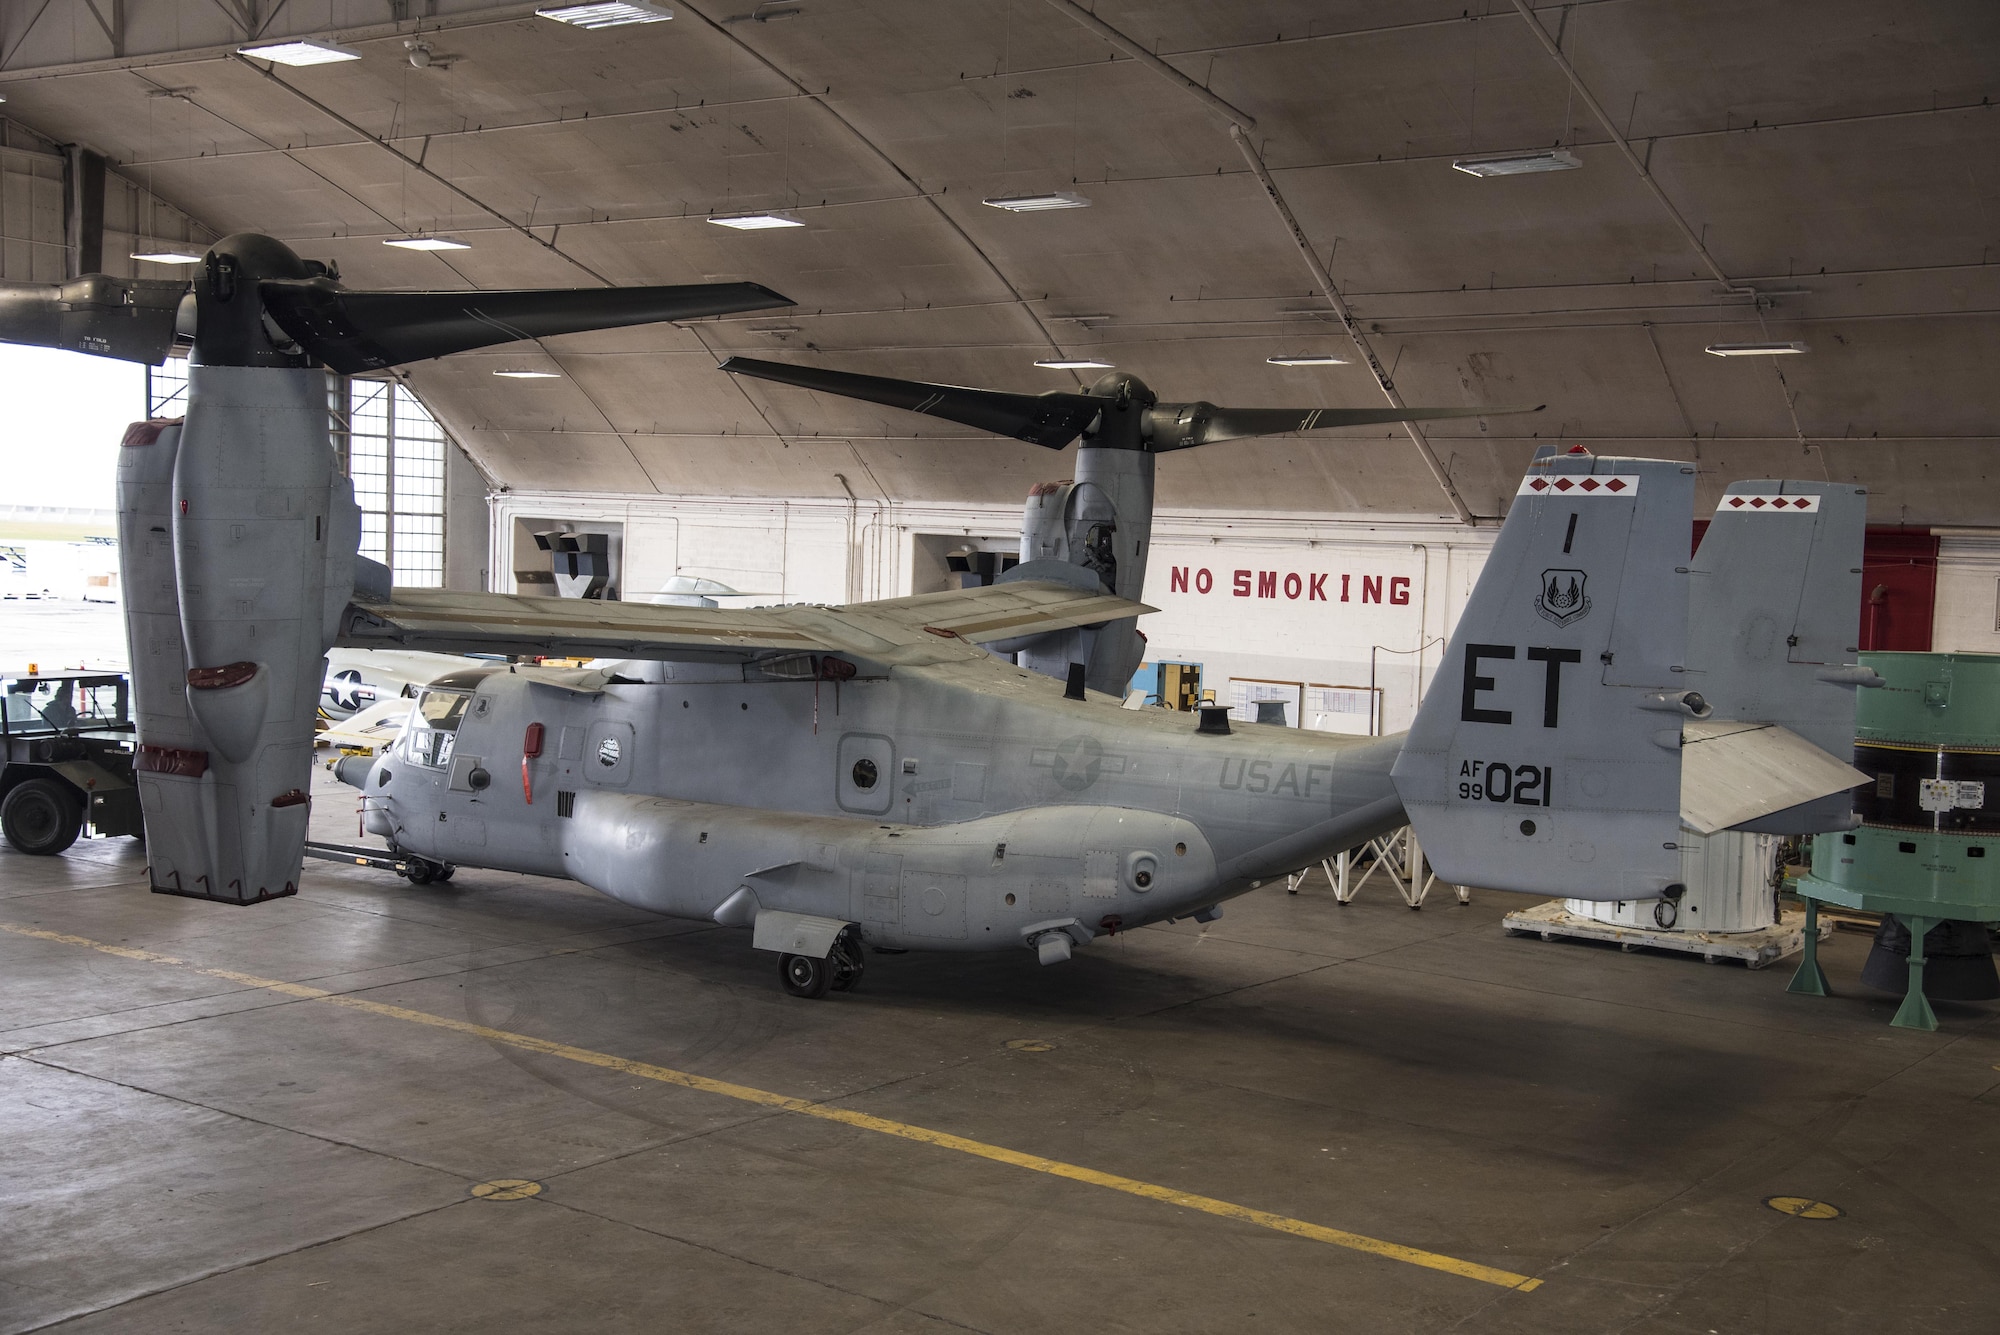 DAYTON, Ohio -- The Bell-Boeing CV-22B Osprey being towed into a restoration building at the National Museum of the U.S. Air Force on Nov. 20, 2016. (U.S. Air Force photo by Ken LaRock)